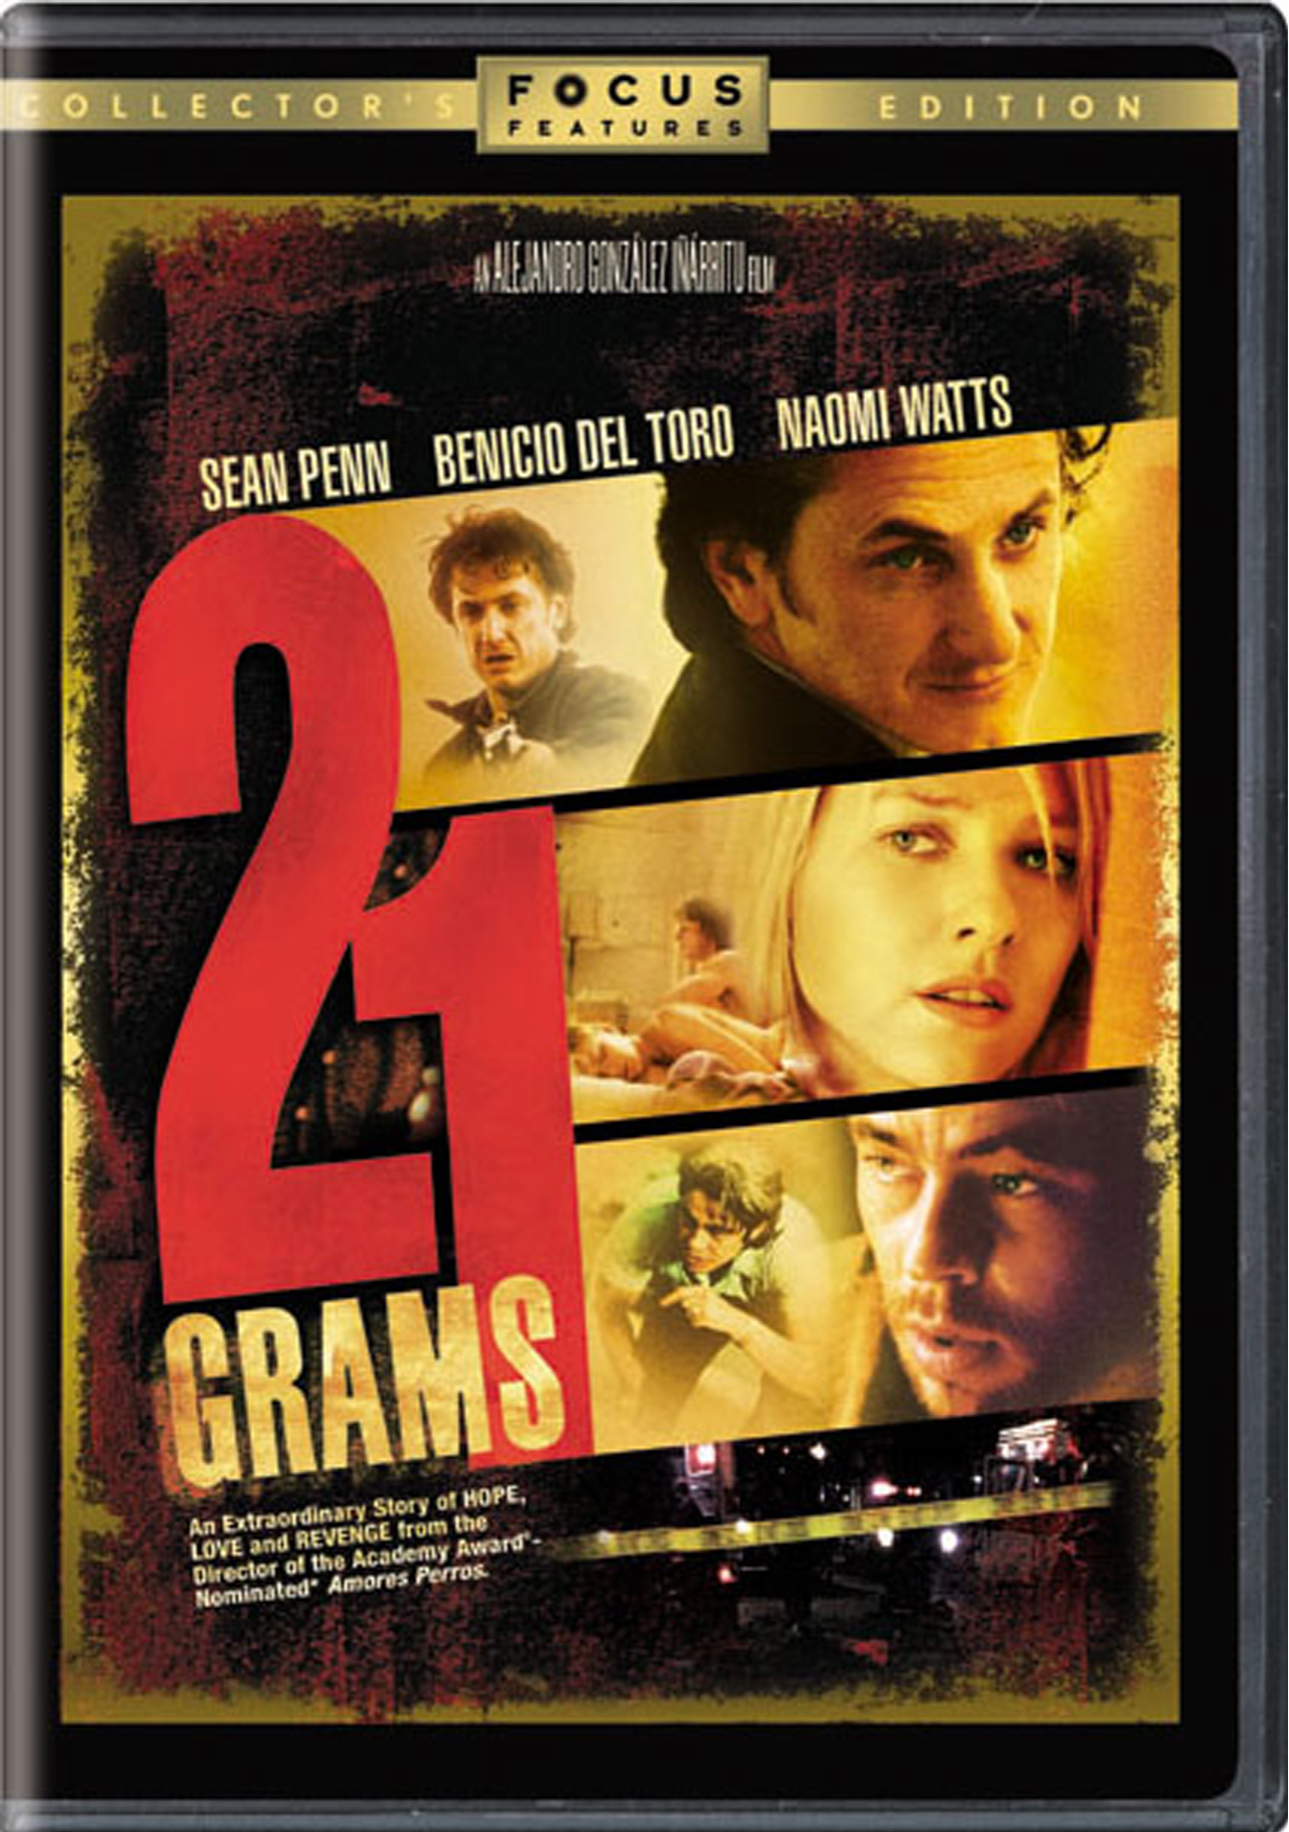 21 Grams (Collector's Edition) - DVD [ 2003 ]  - Drama Movies On DVD - Movies On GRUV